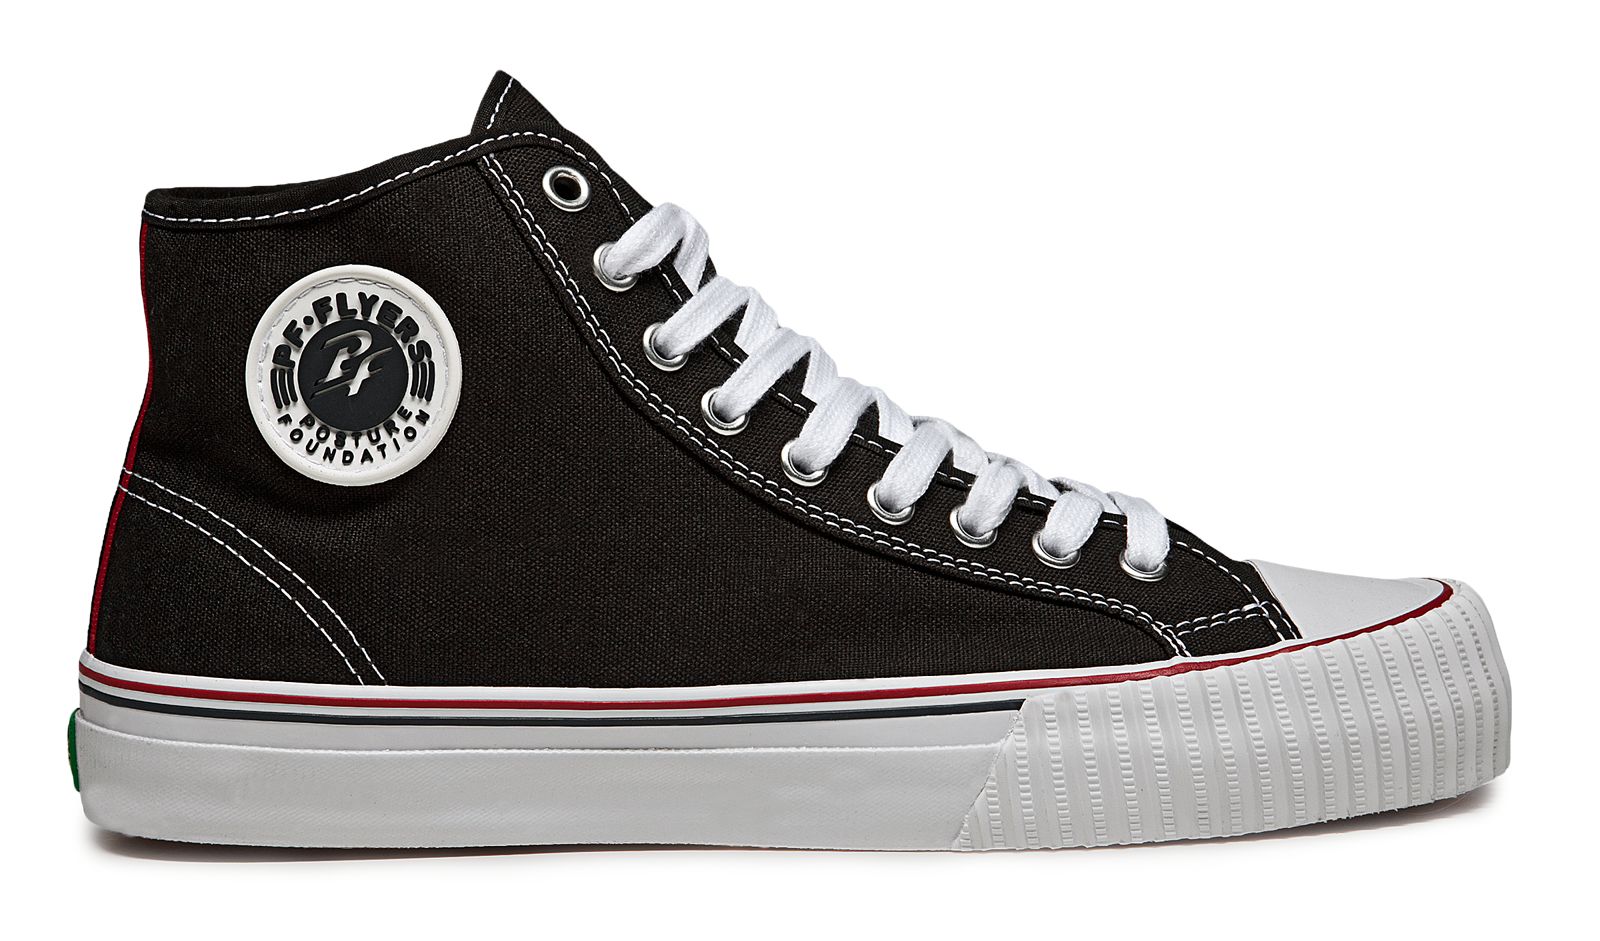 are pf flyers converse